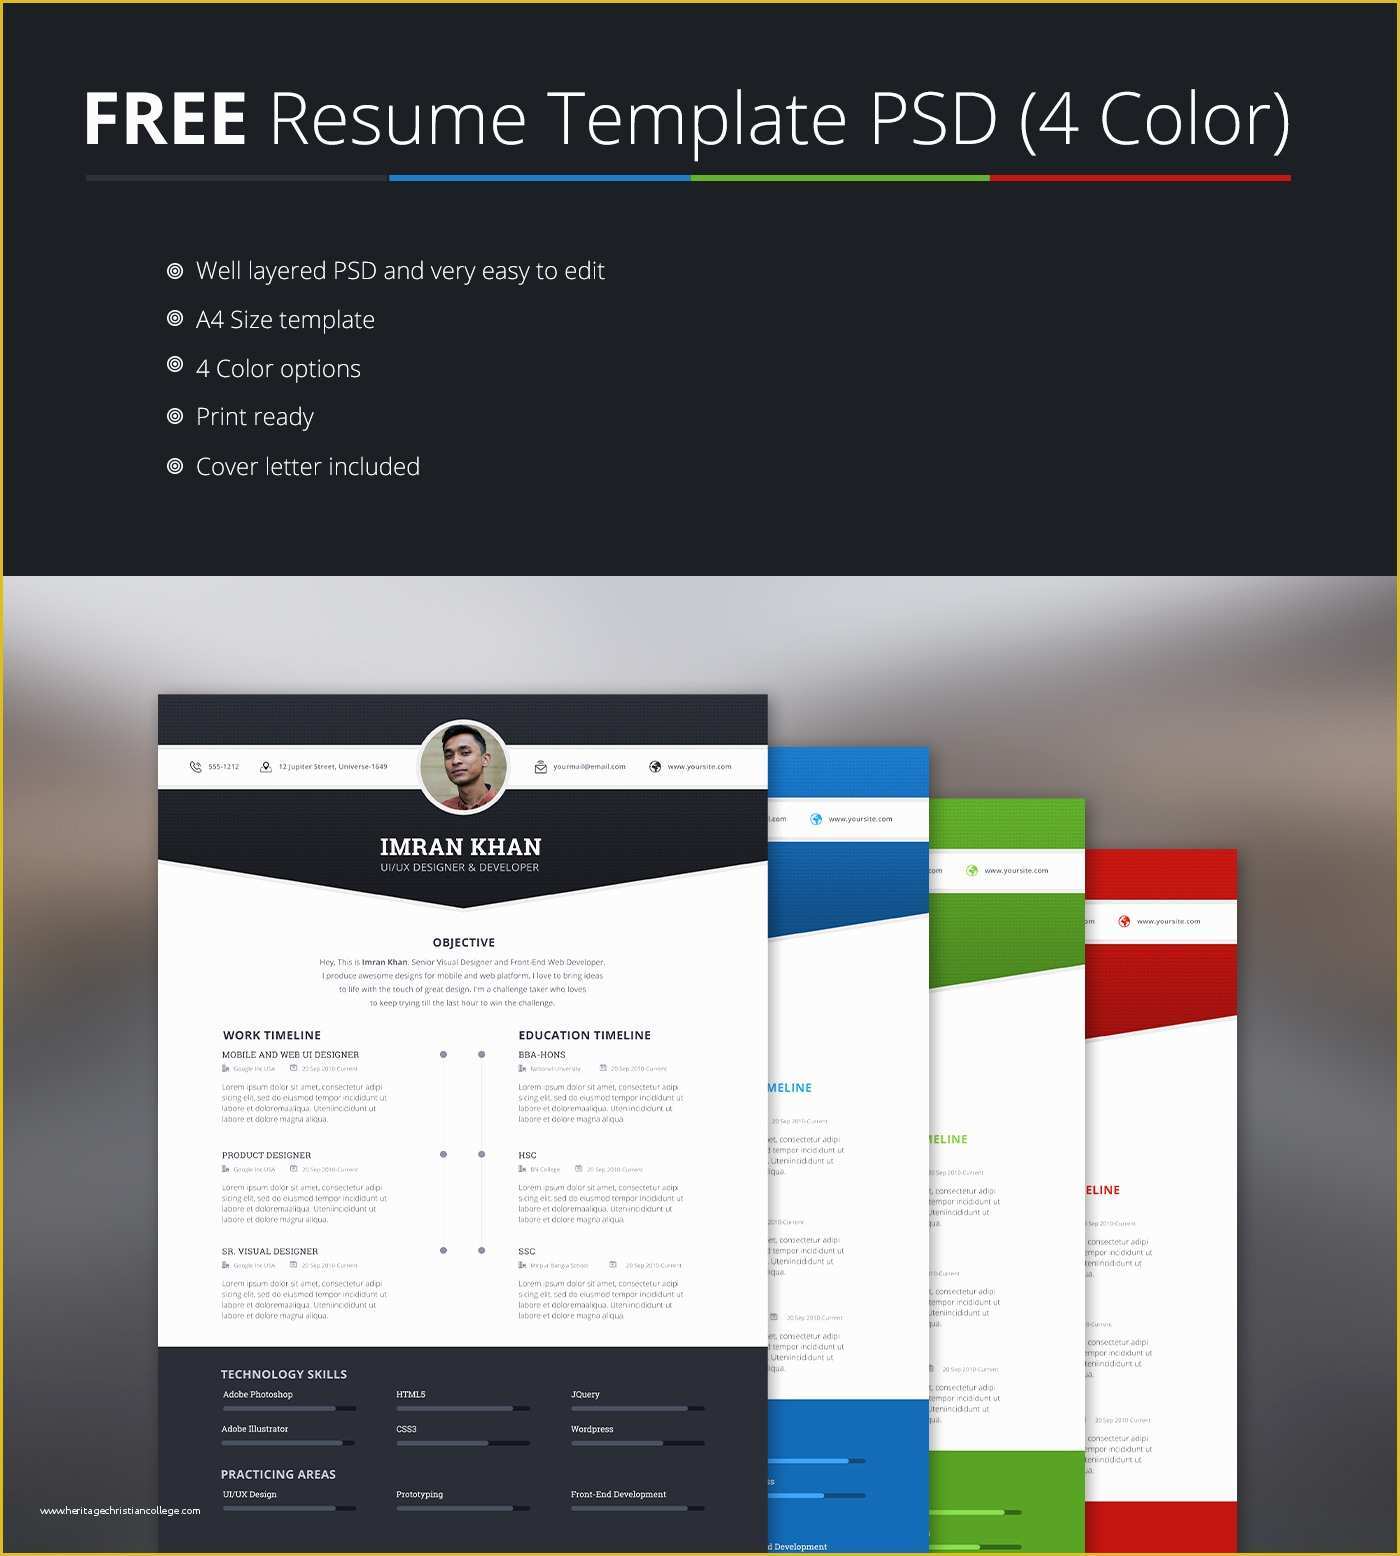 Free Photoshop Templates Of Free Resume Template Psd 4 Colors On Behance